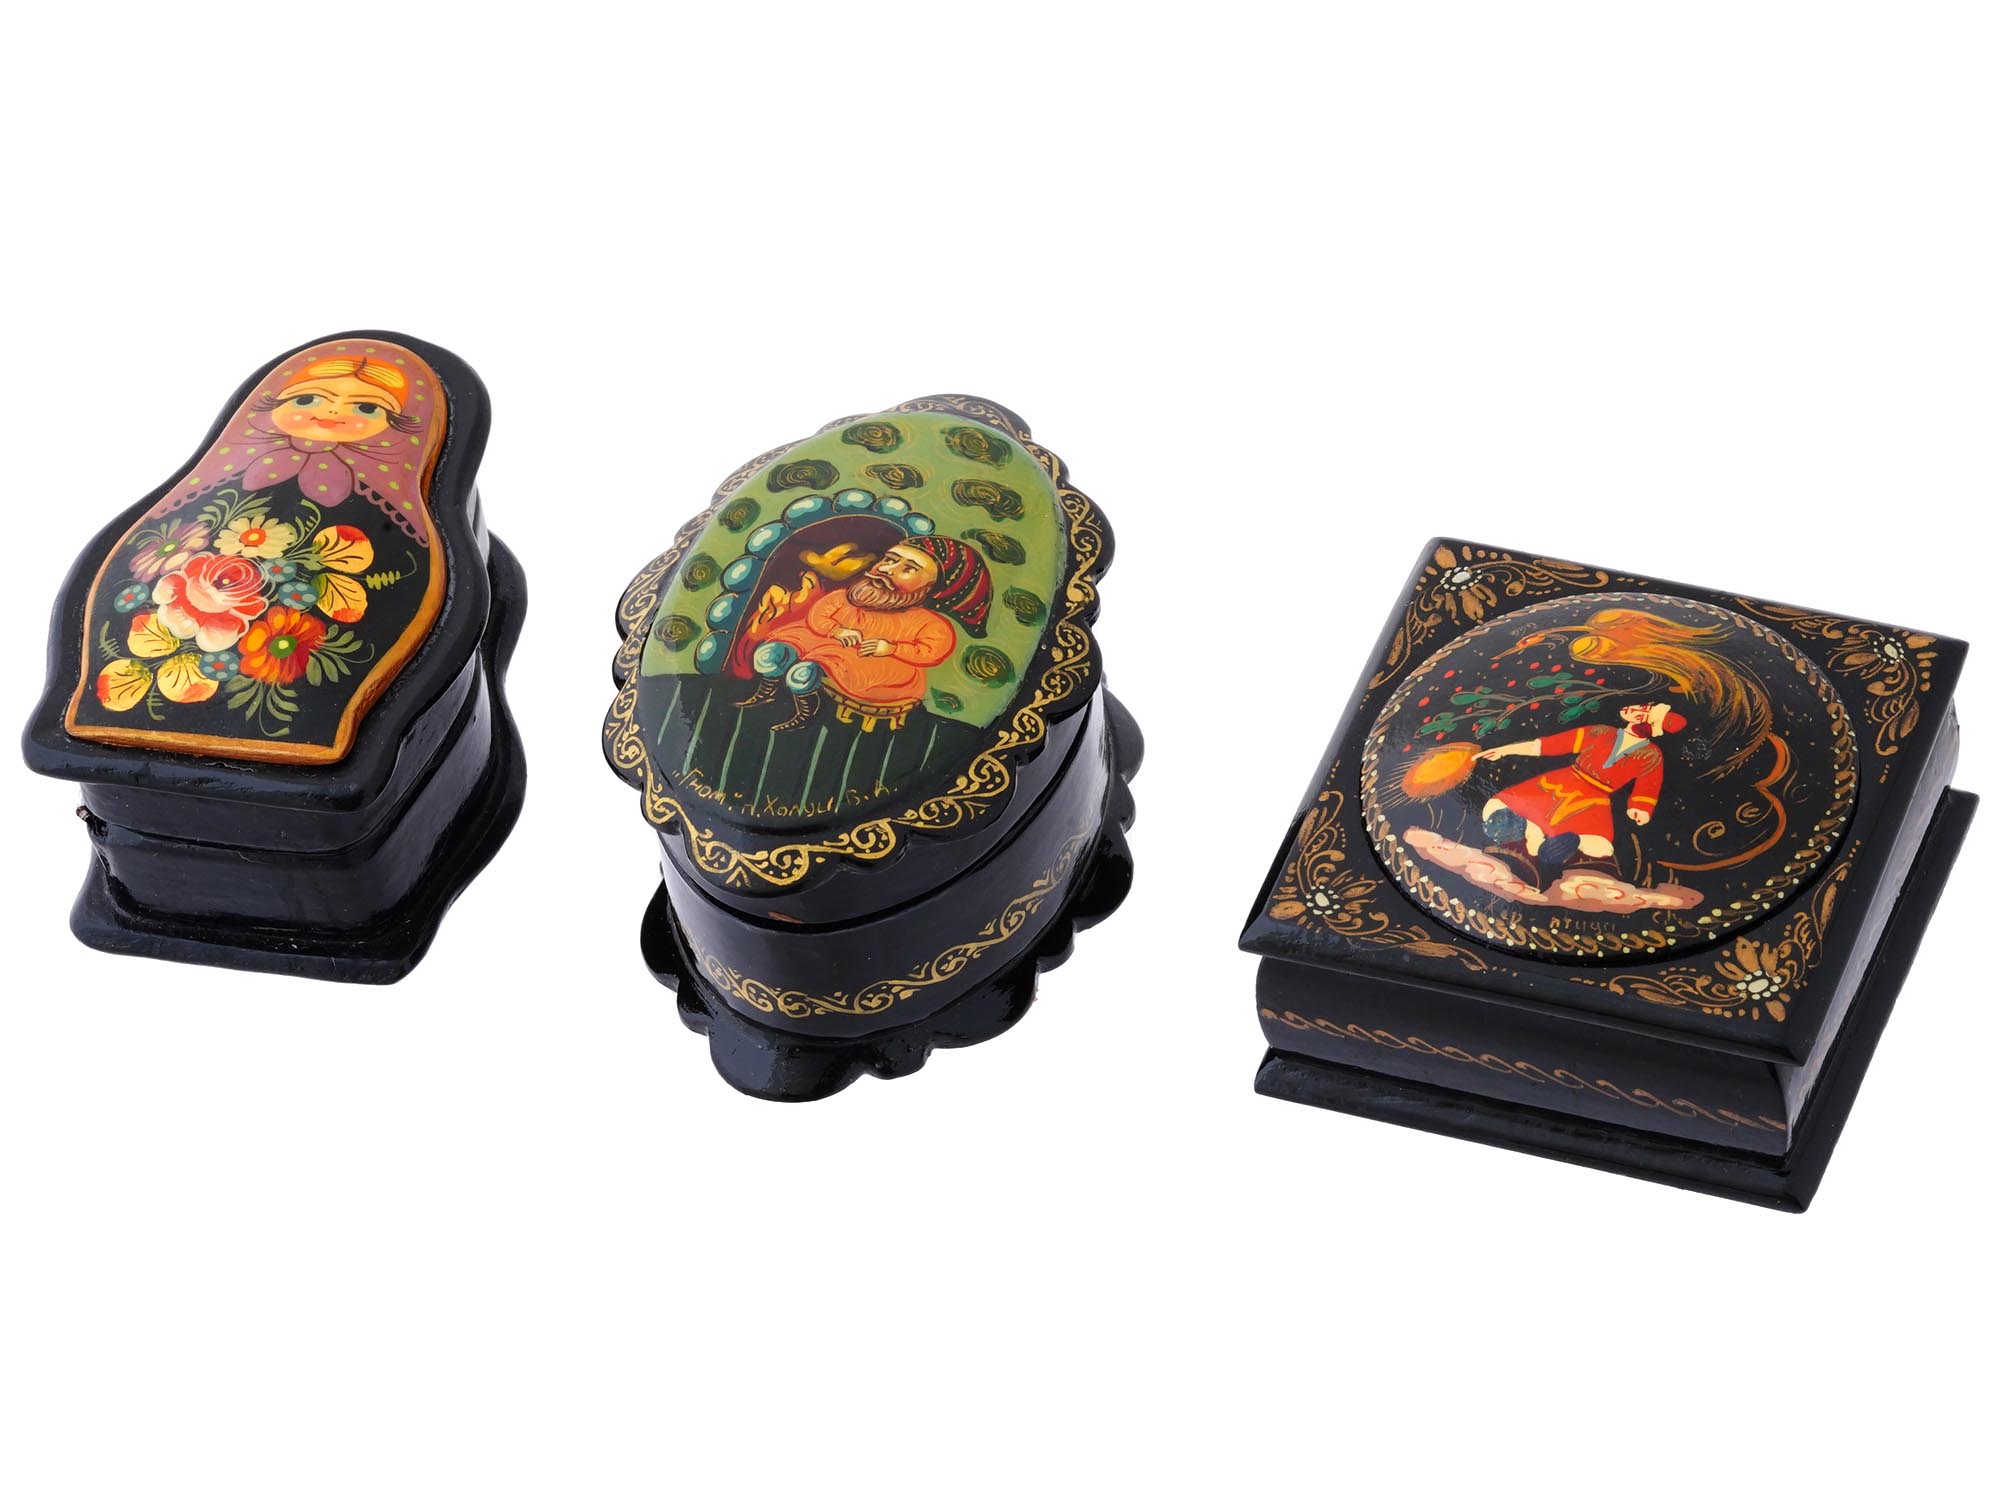 VINTAGE RUSSIAN KHOLUY LACQUER WOODEN TRINKET BOXES PIC-0